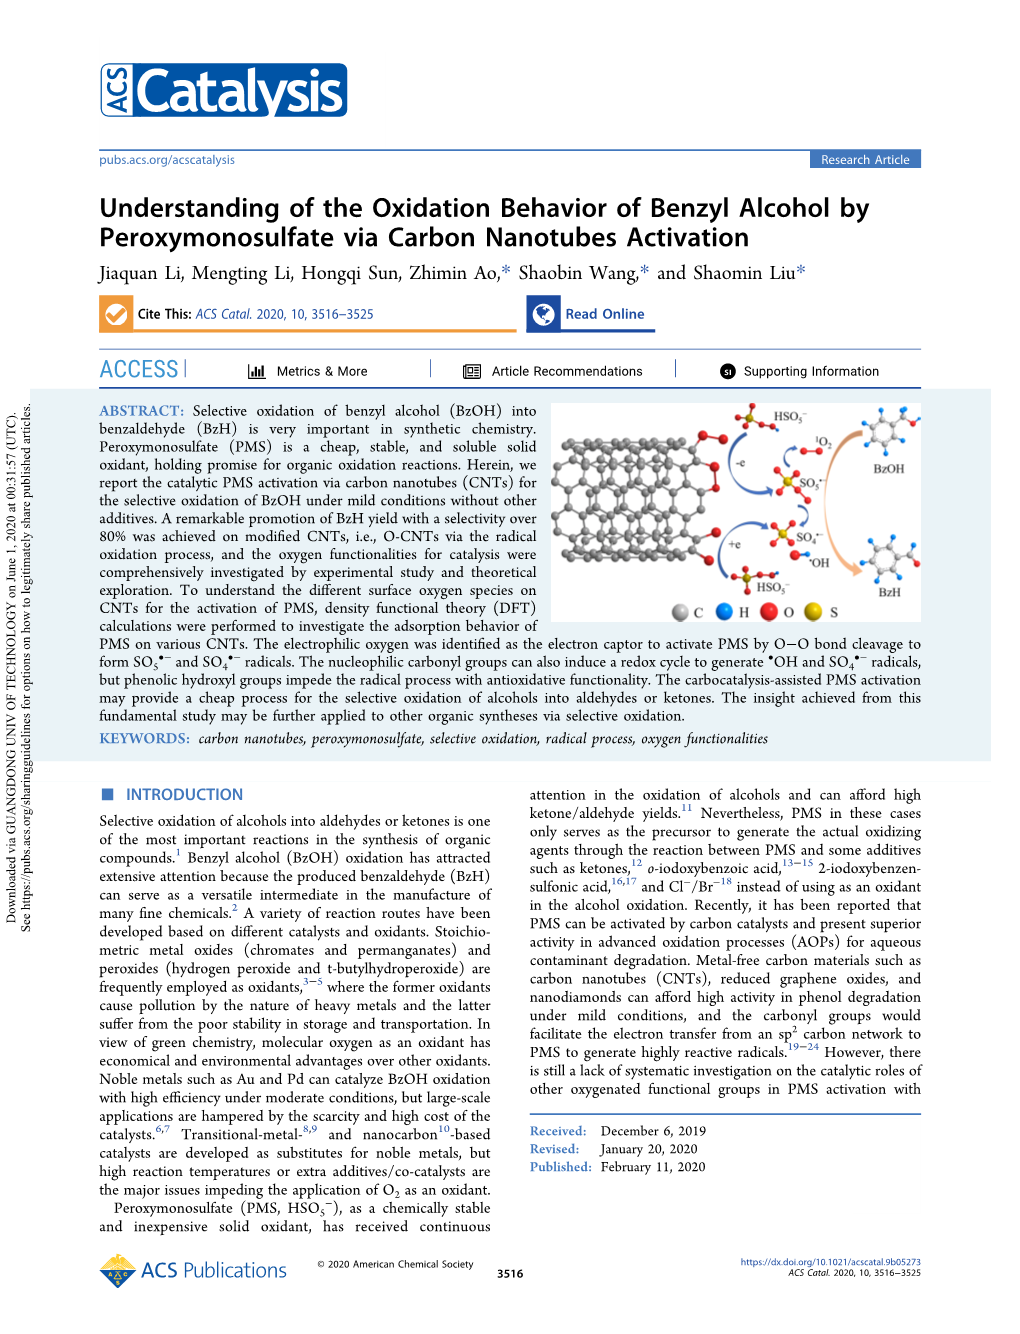 Understanding of the Oxidation Behavior of Benzyl Alcohol by Peroxymonosulfate Via Carbon Nanotubes Activation